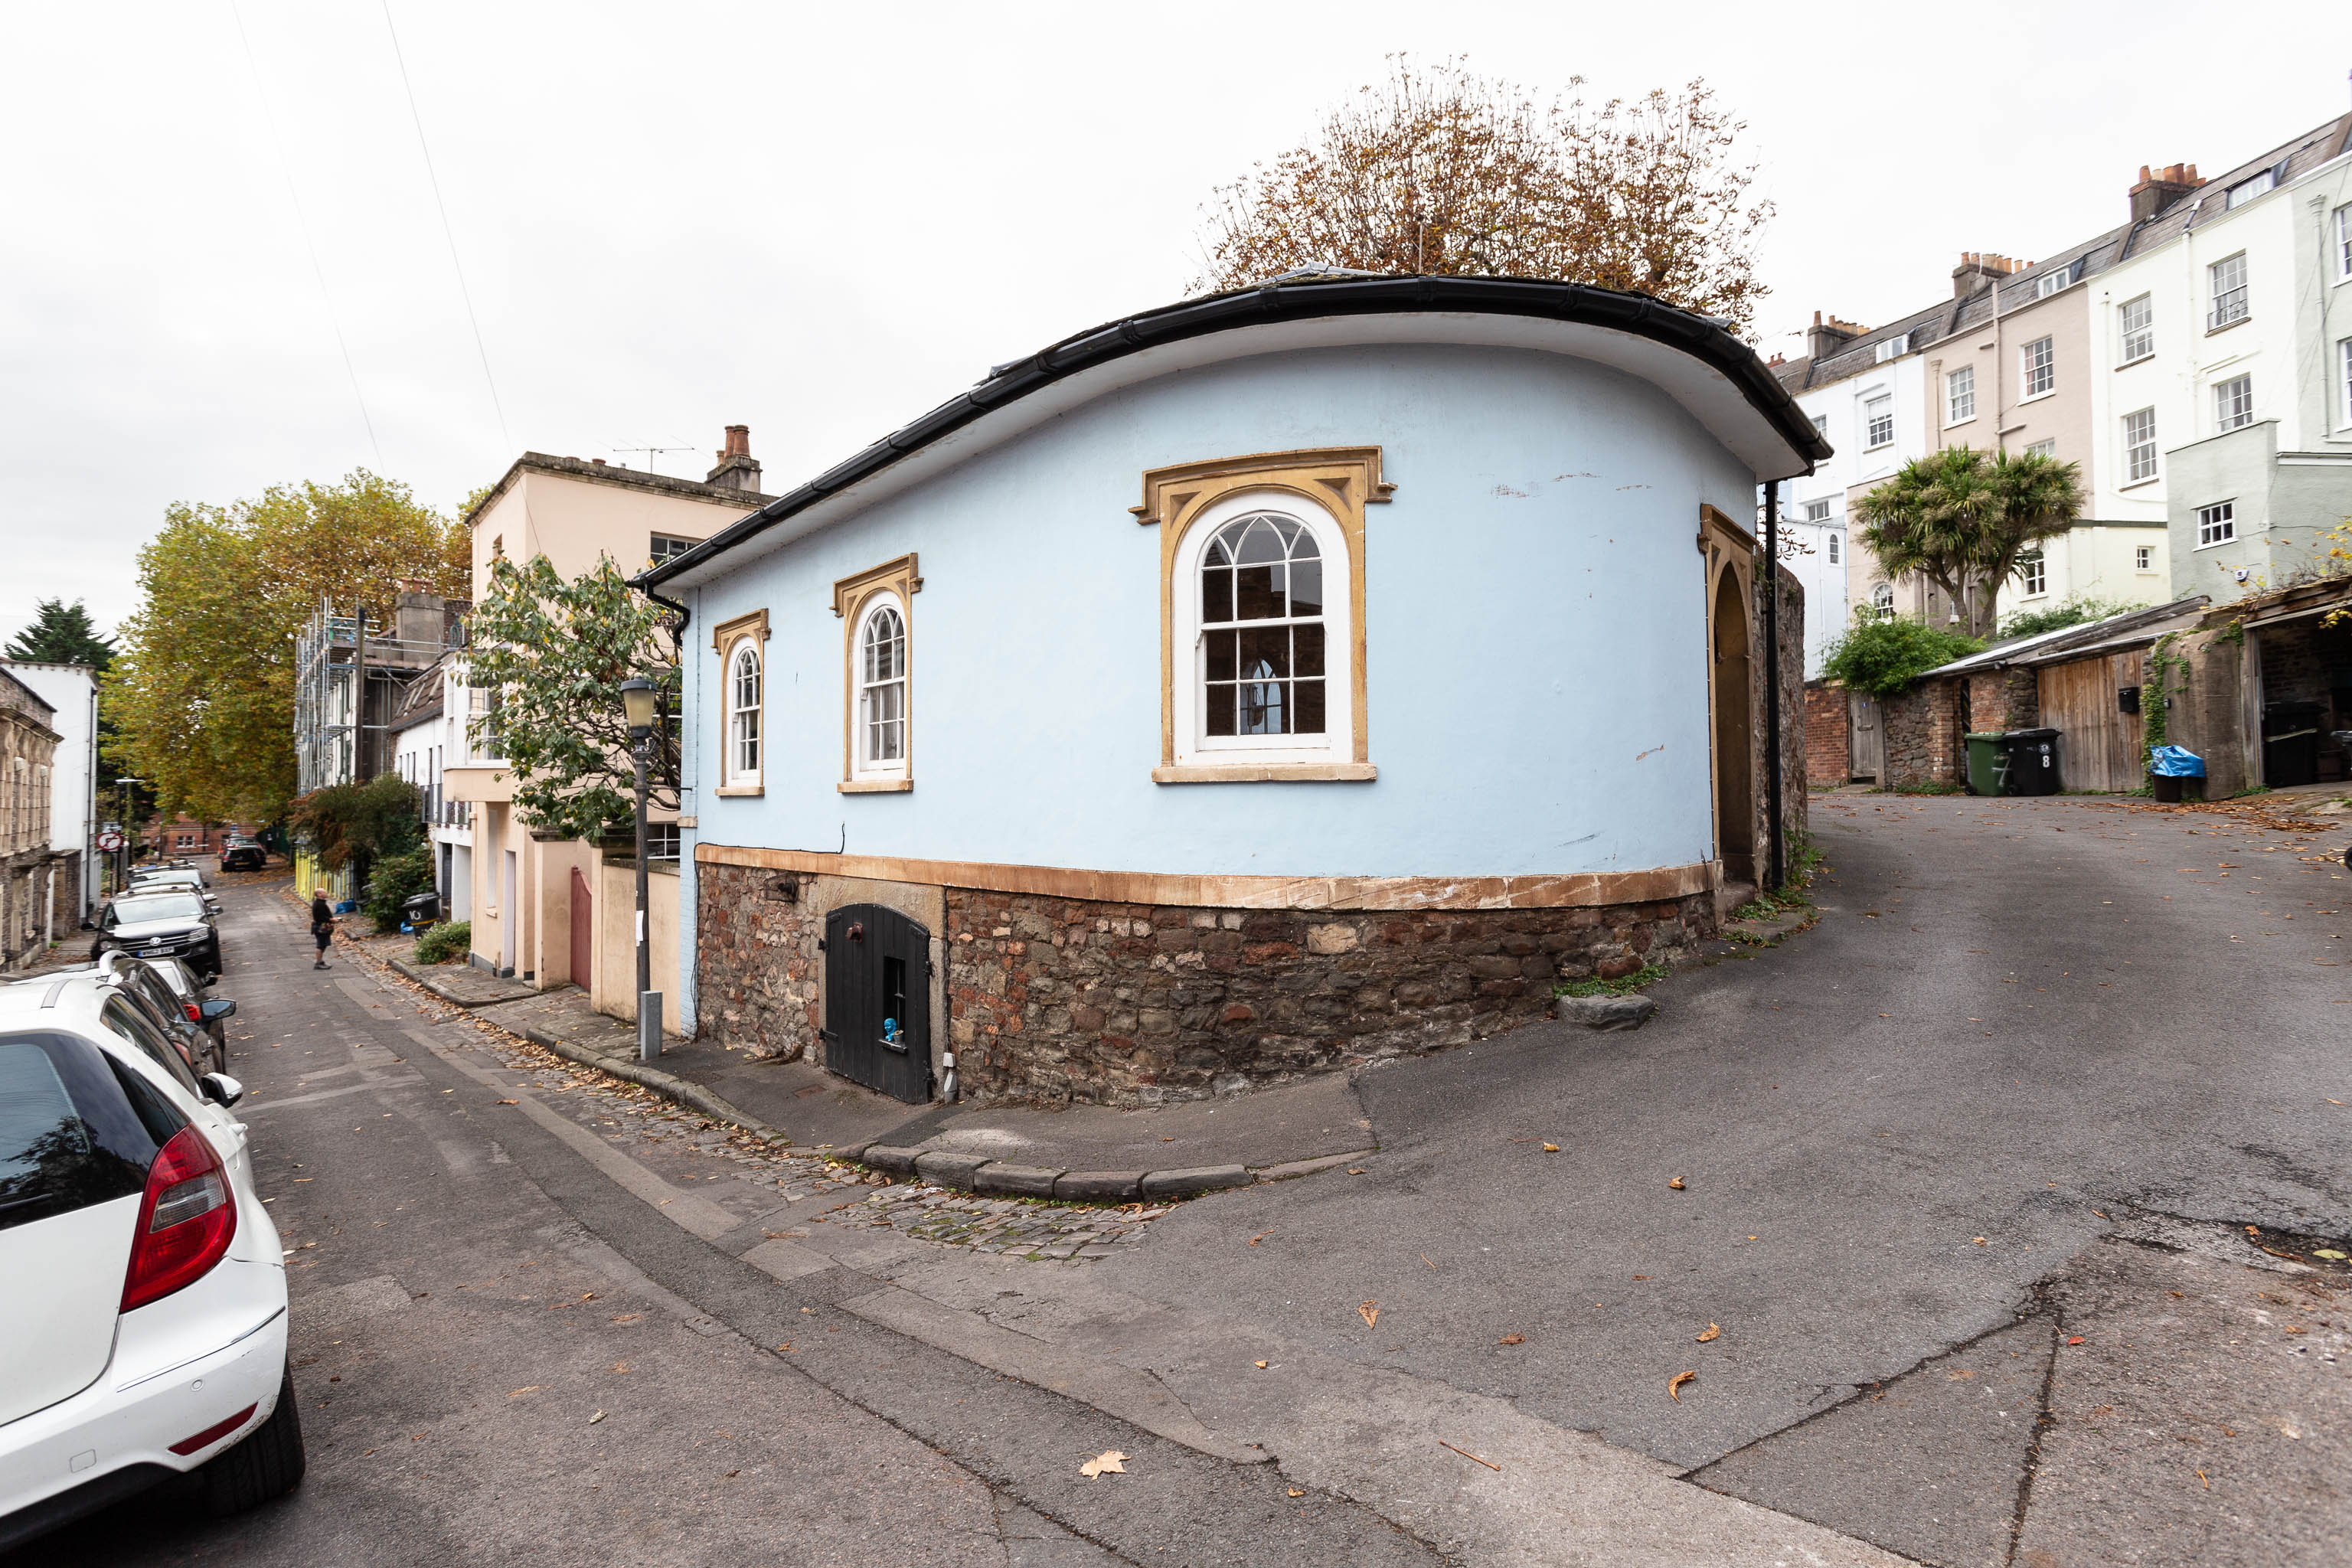 Quirky
This strange little two-bedroom place in Hotwells just sold for £399,950.
